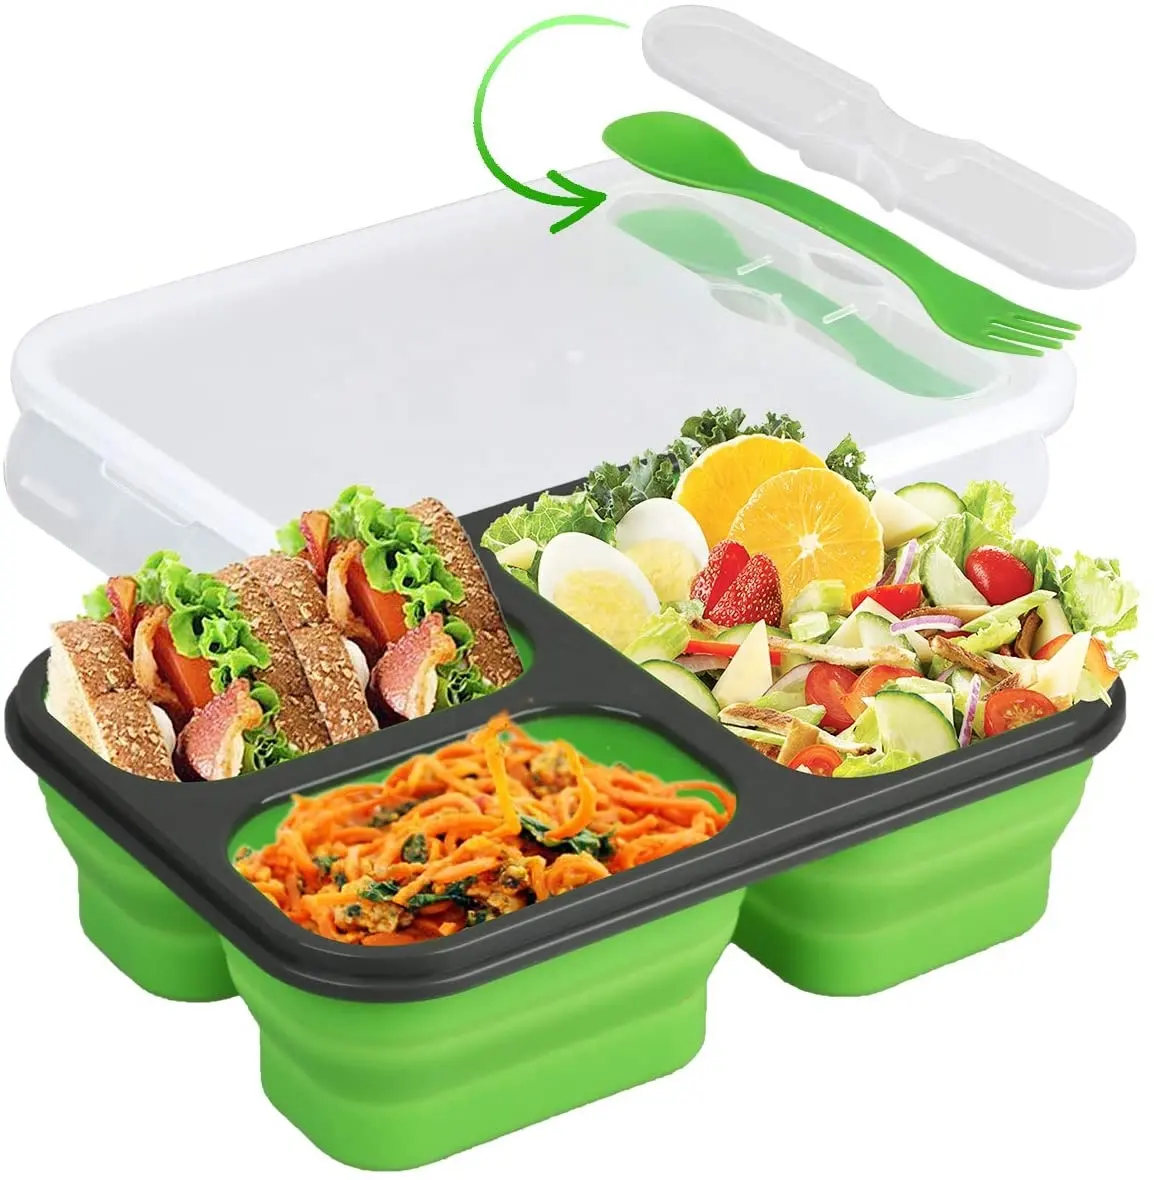 OKSILICONE Reusable Collapsible Silicone Lunch Boxes Leakproof Microwave Silicone Storage Container Box with Lids